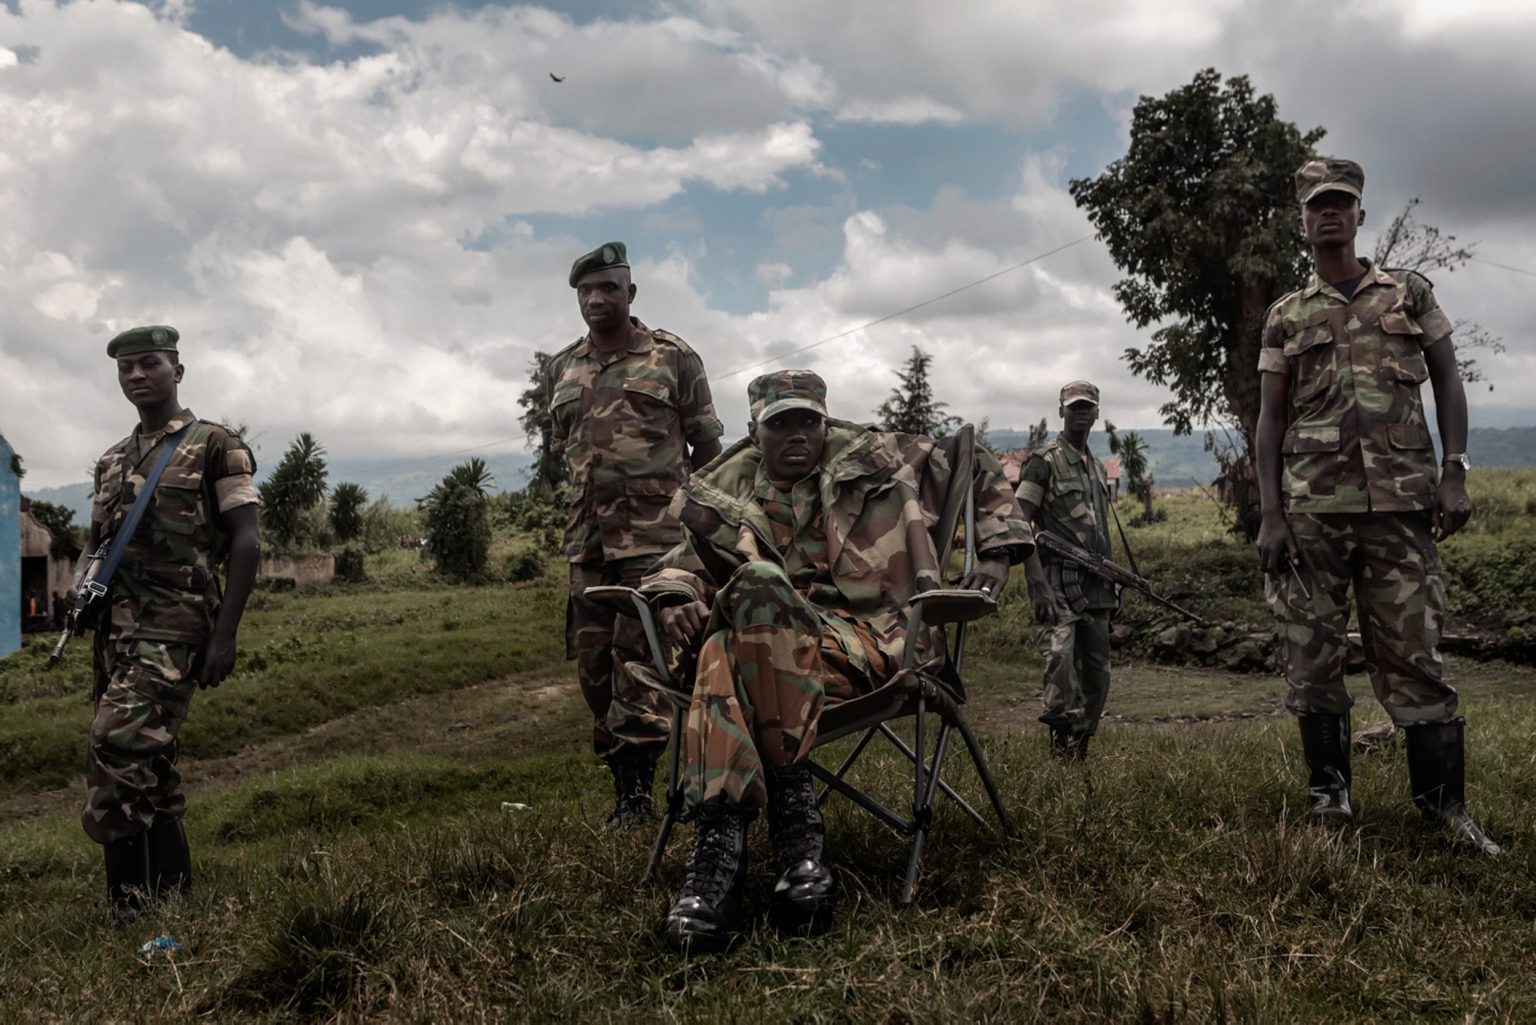 Brigadier General Sultani Makenga (seated) of the newly formed Congolese Revolutionary is seen in Rumangabo military camp (Bunagana). The M23 Movement, the newly formed political wing of former M23 rebels, has formed a semi-autonomous administration structure in areas under their control in north Kivu province.  Rutshuru, Democratic Republic of the Congo, 2012